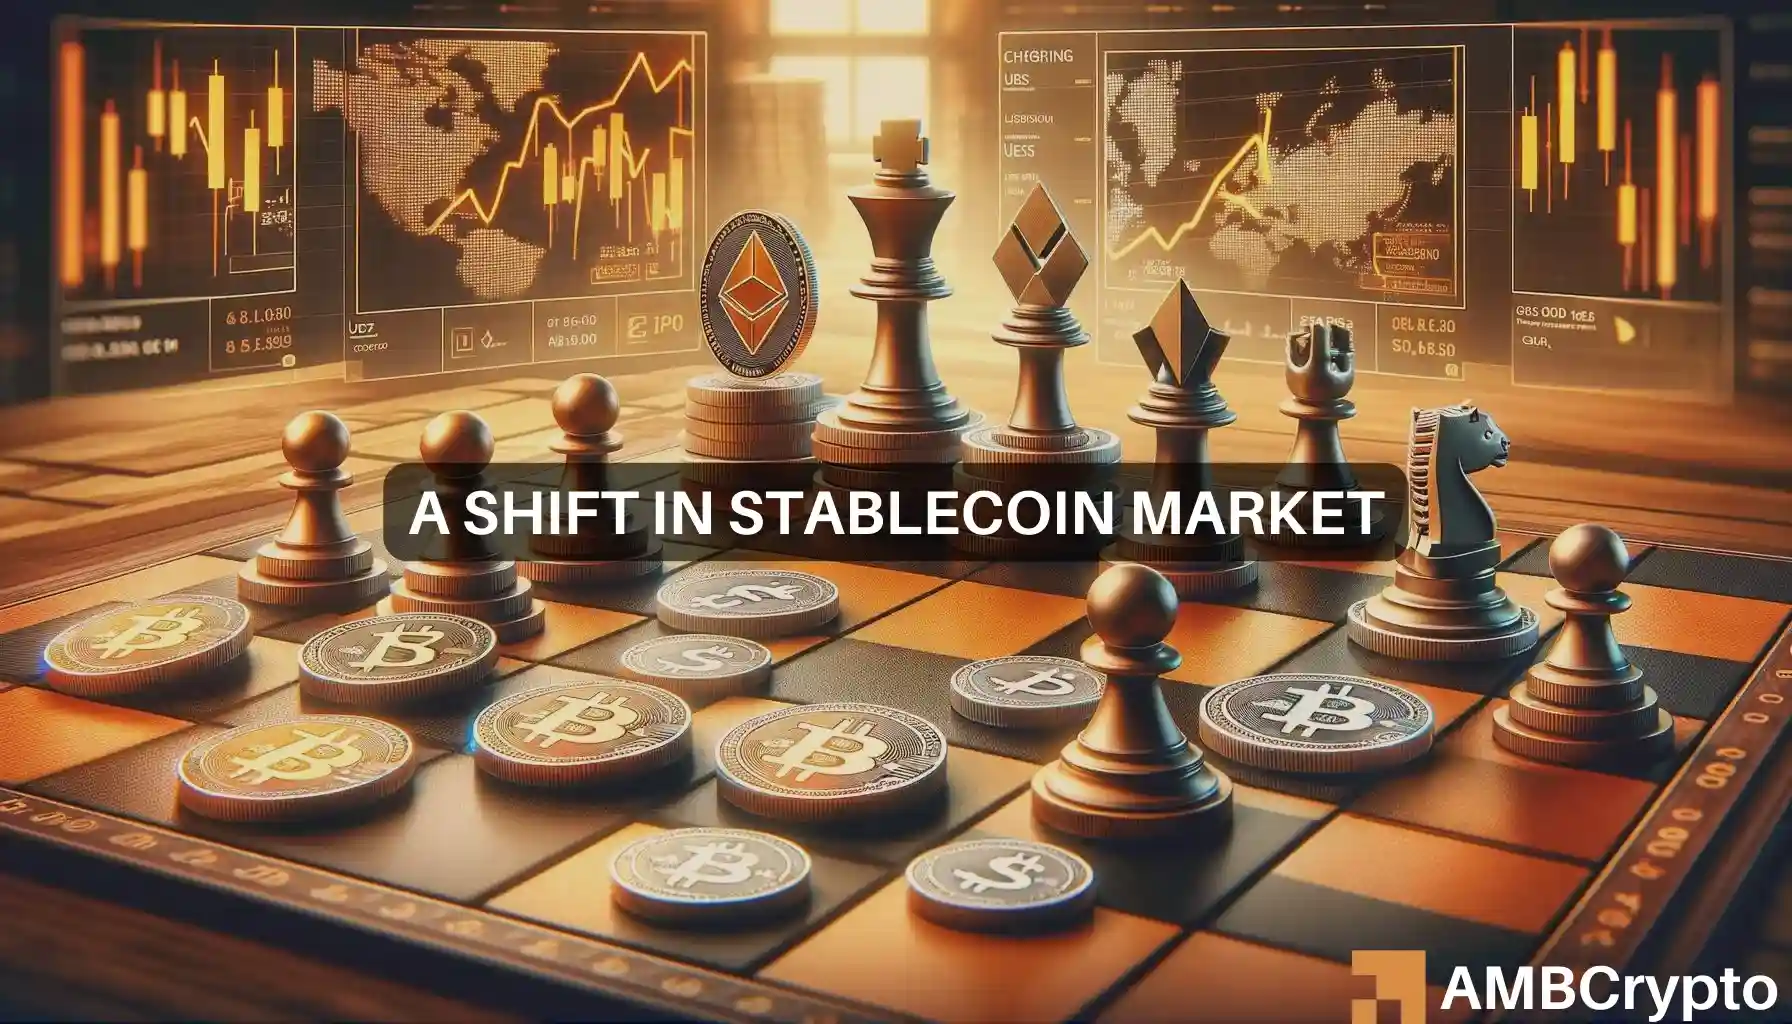  What does this mean for the future of stablecoins?